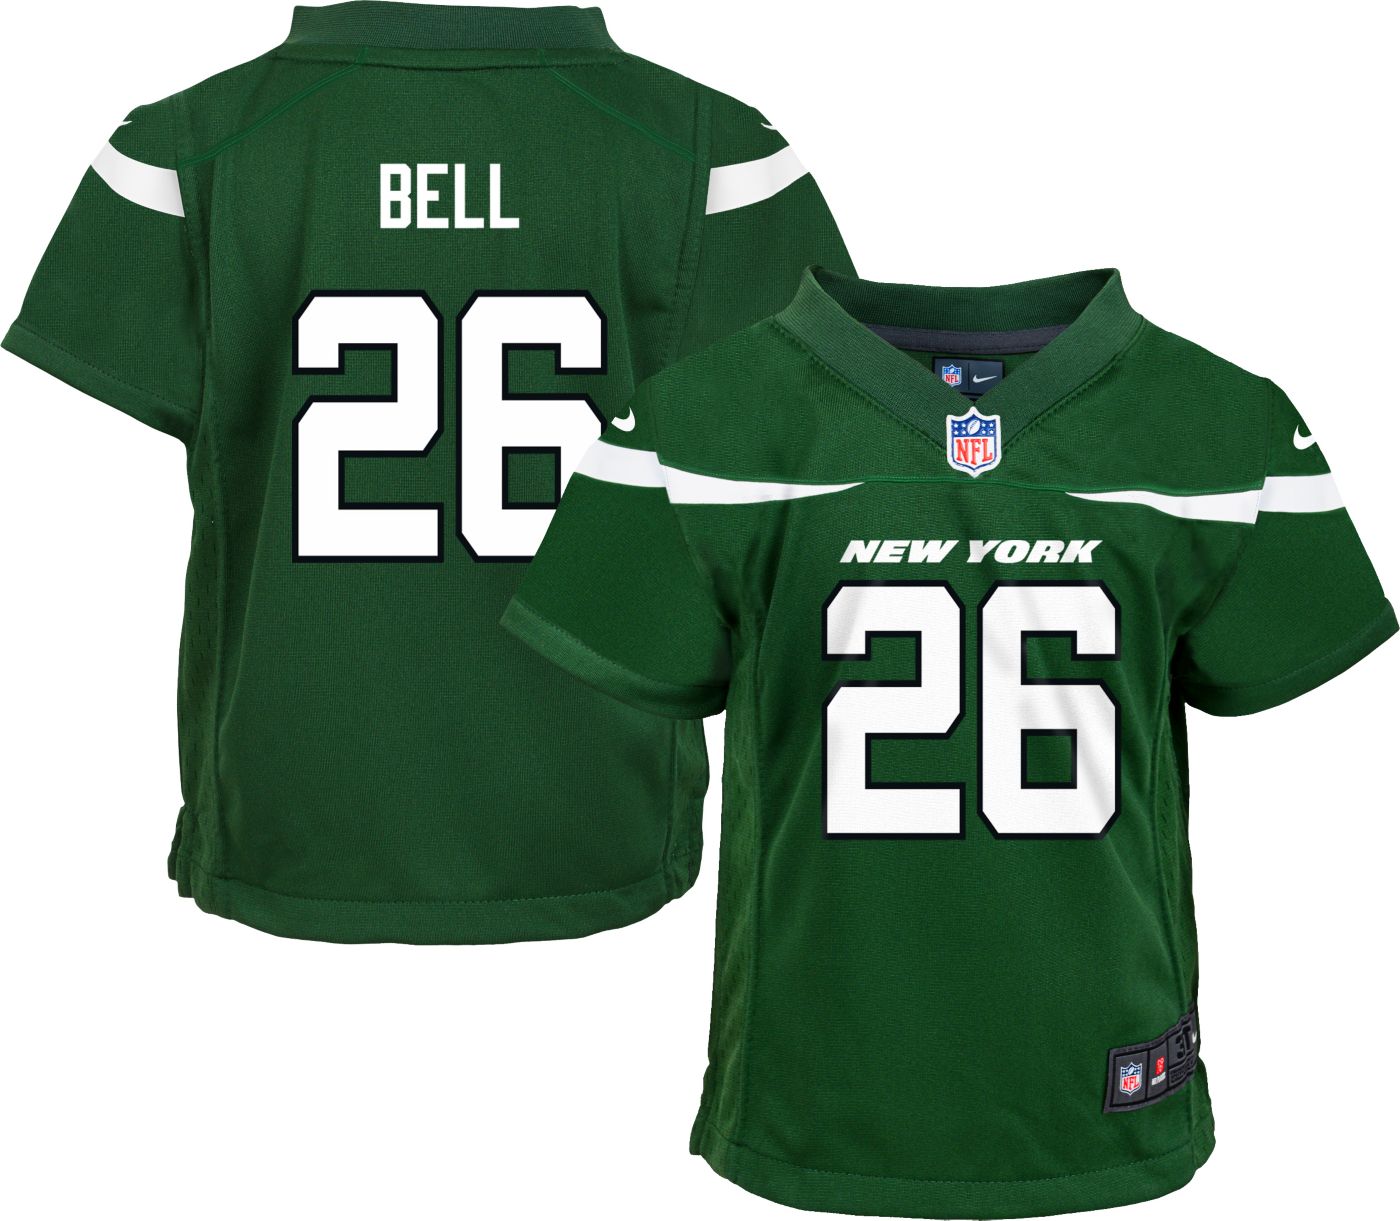 Nike Toddler Home Game Jersey New York Jets Le'Veon Bell 26 DICK'S Sporting Goods